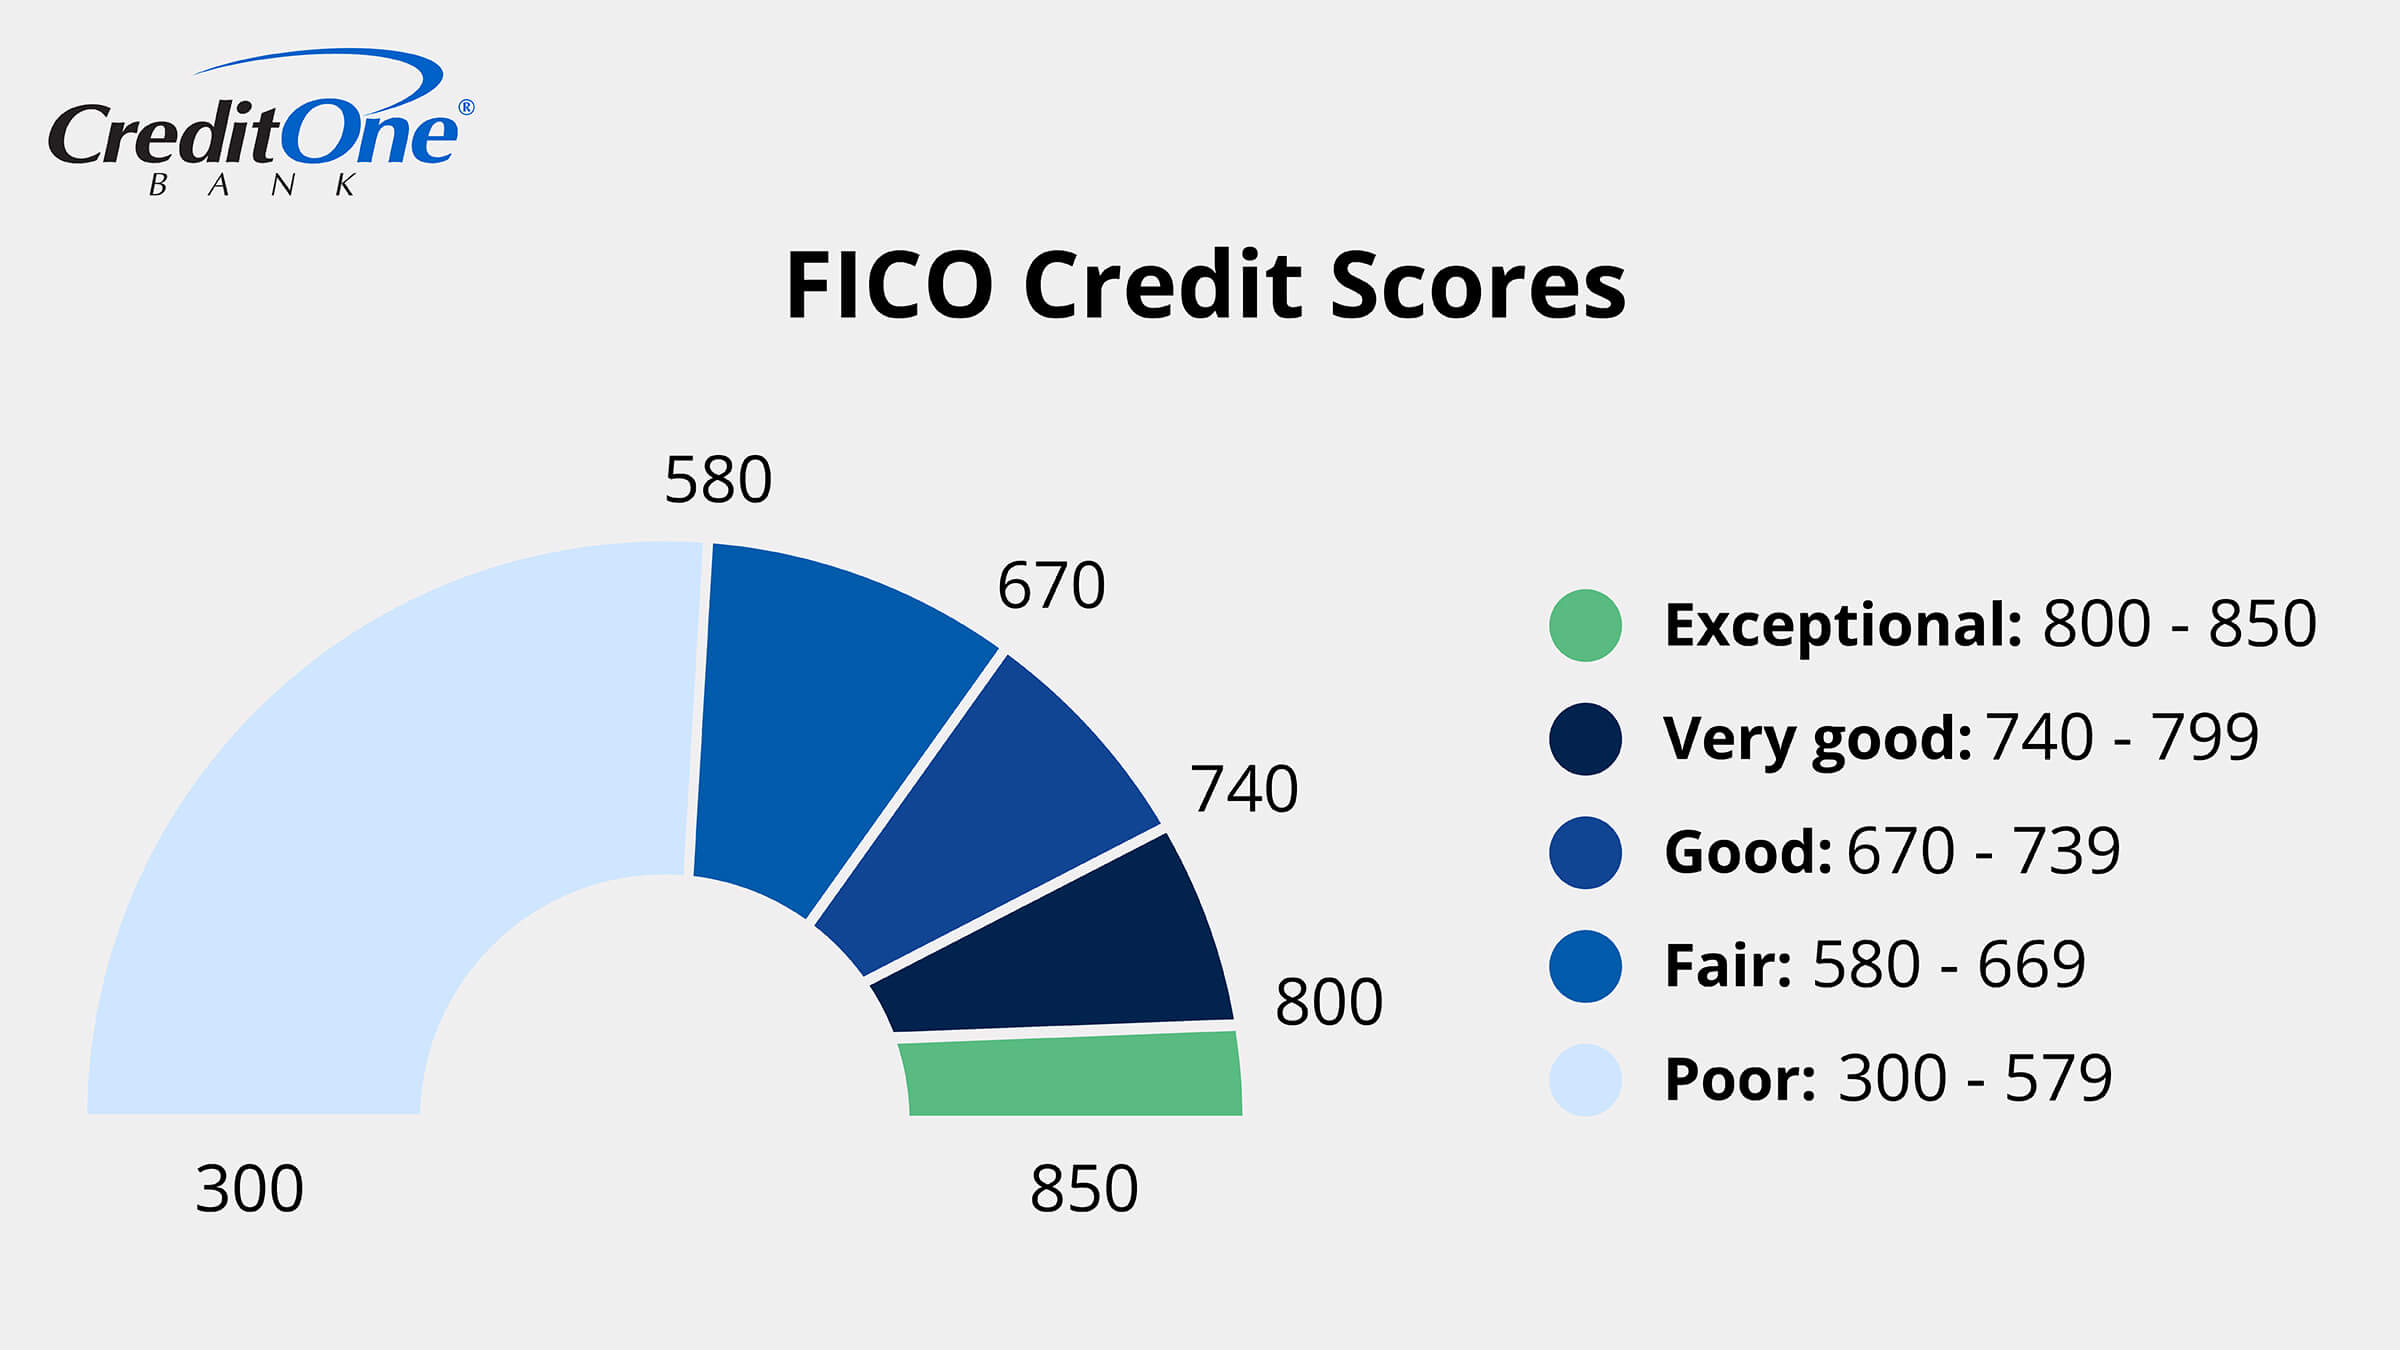 Colored meter depicts the ranges of FICO Credit Scores from Exceptional to Poor.